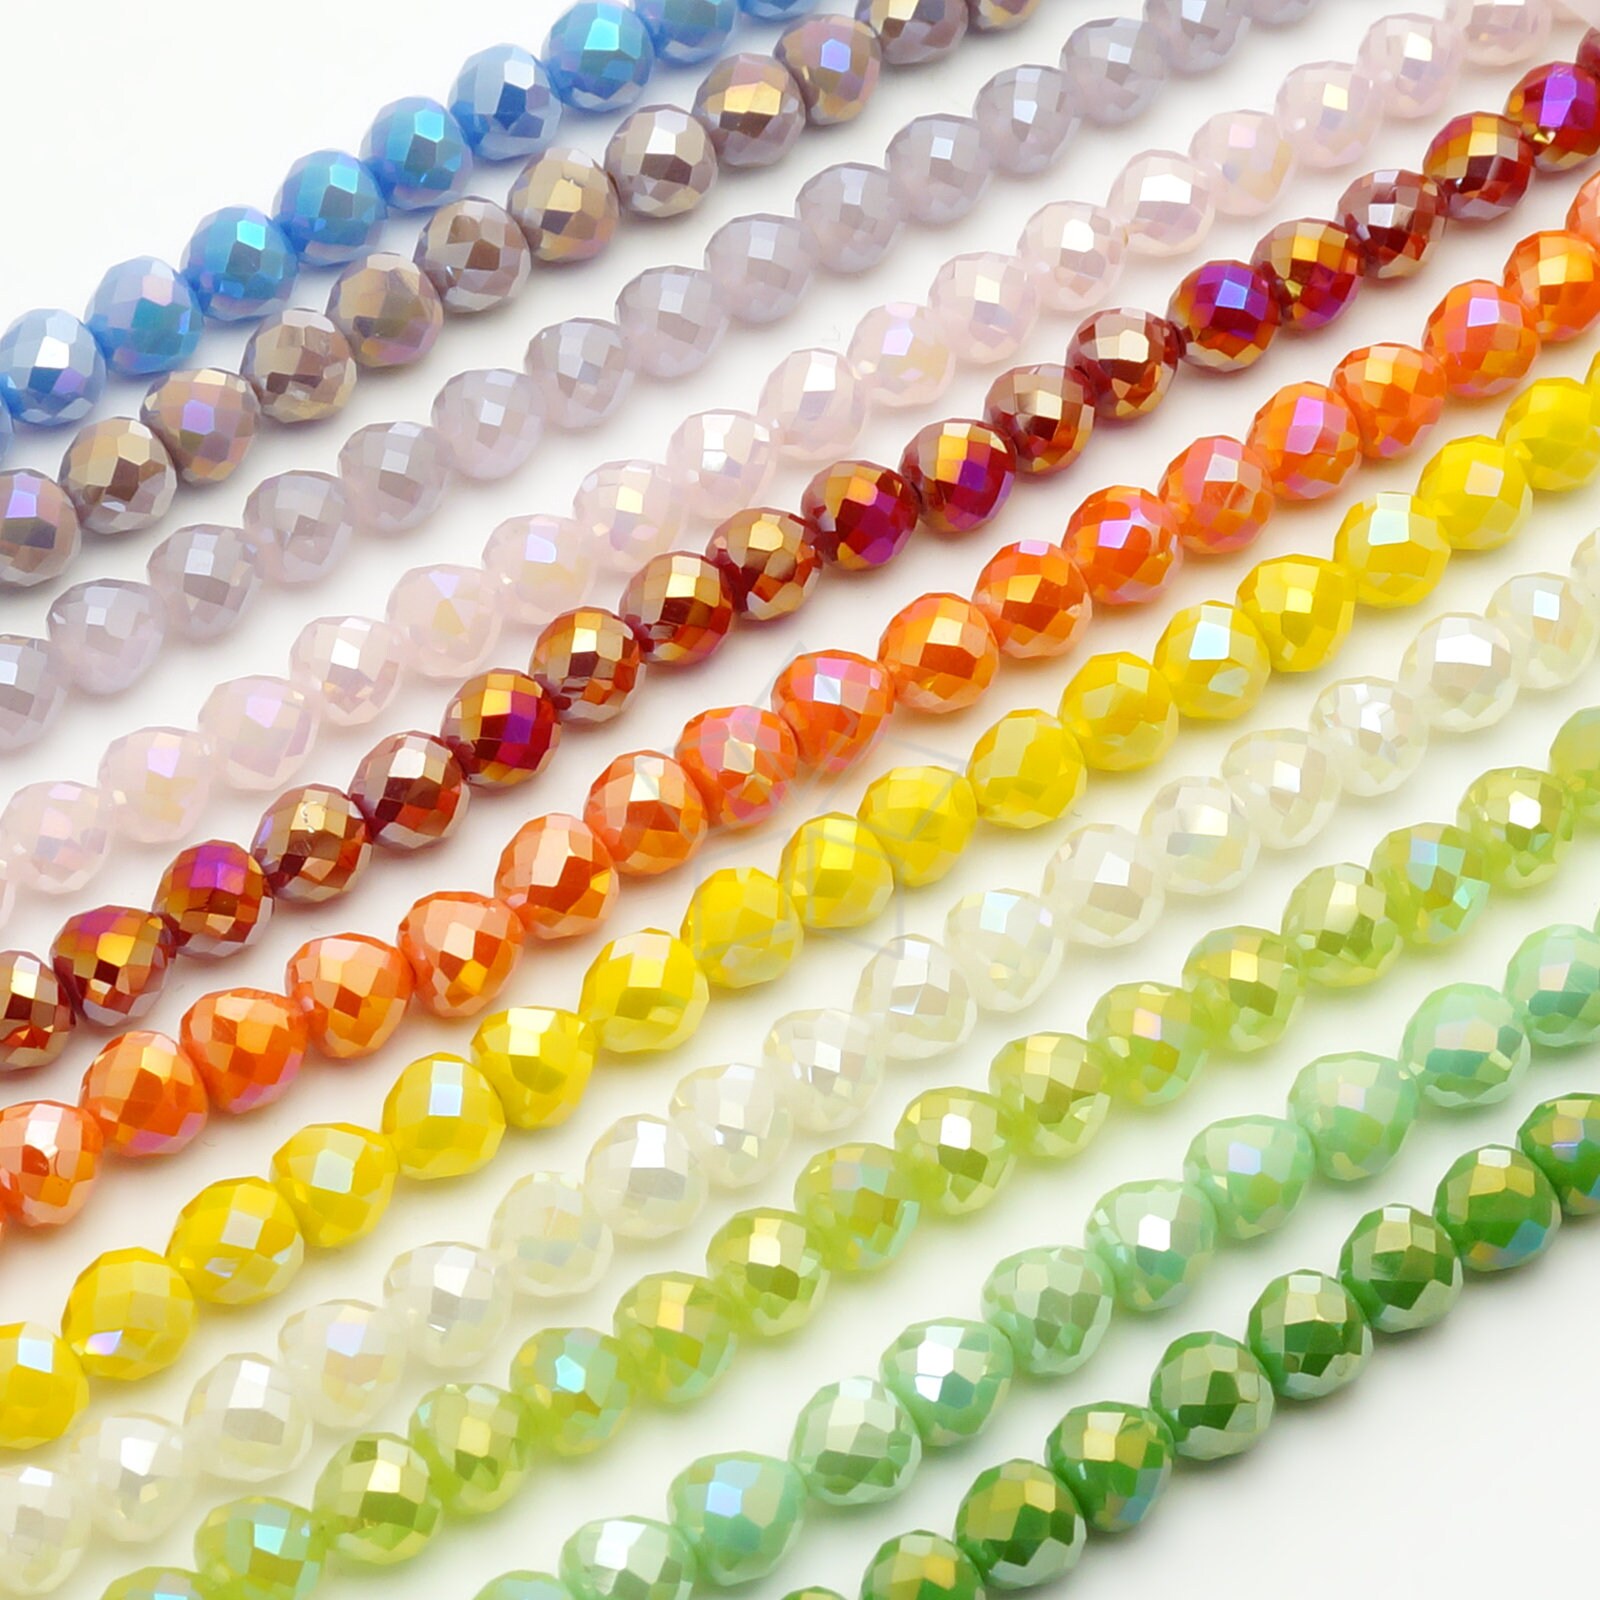 20 Strds Opaque Glass Beads Smooth Rondelle Tiny Loose Spacers White Craft 8mm 